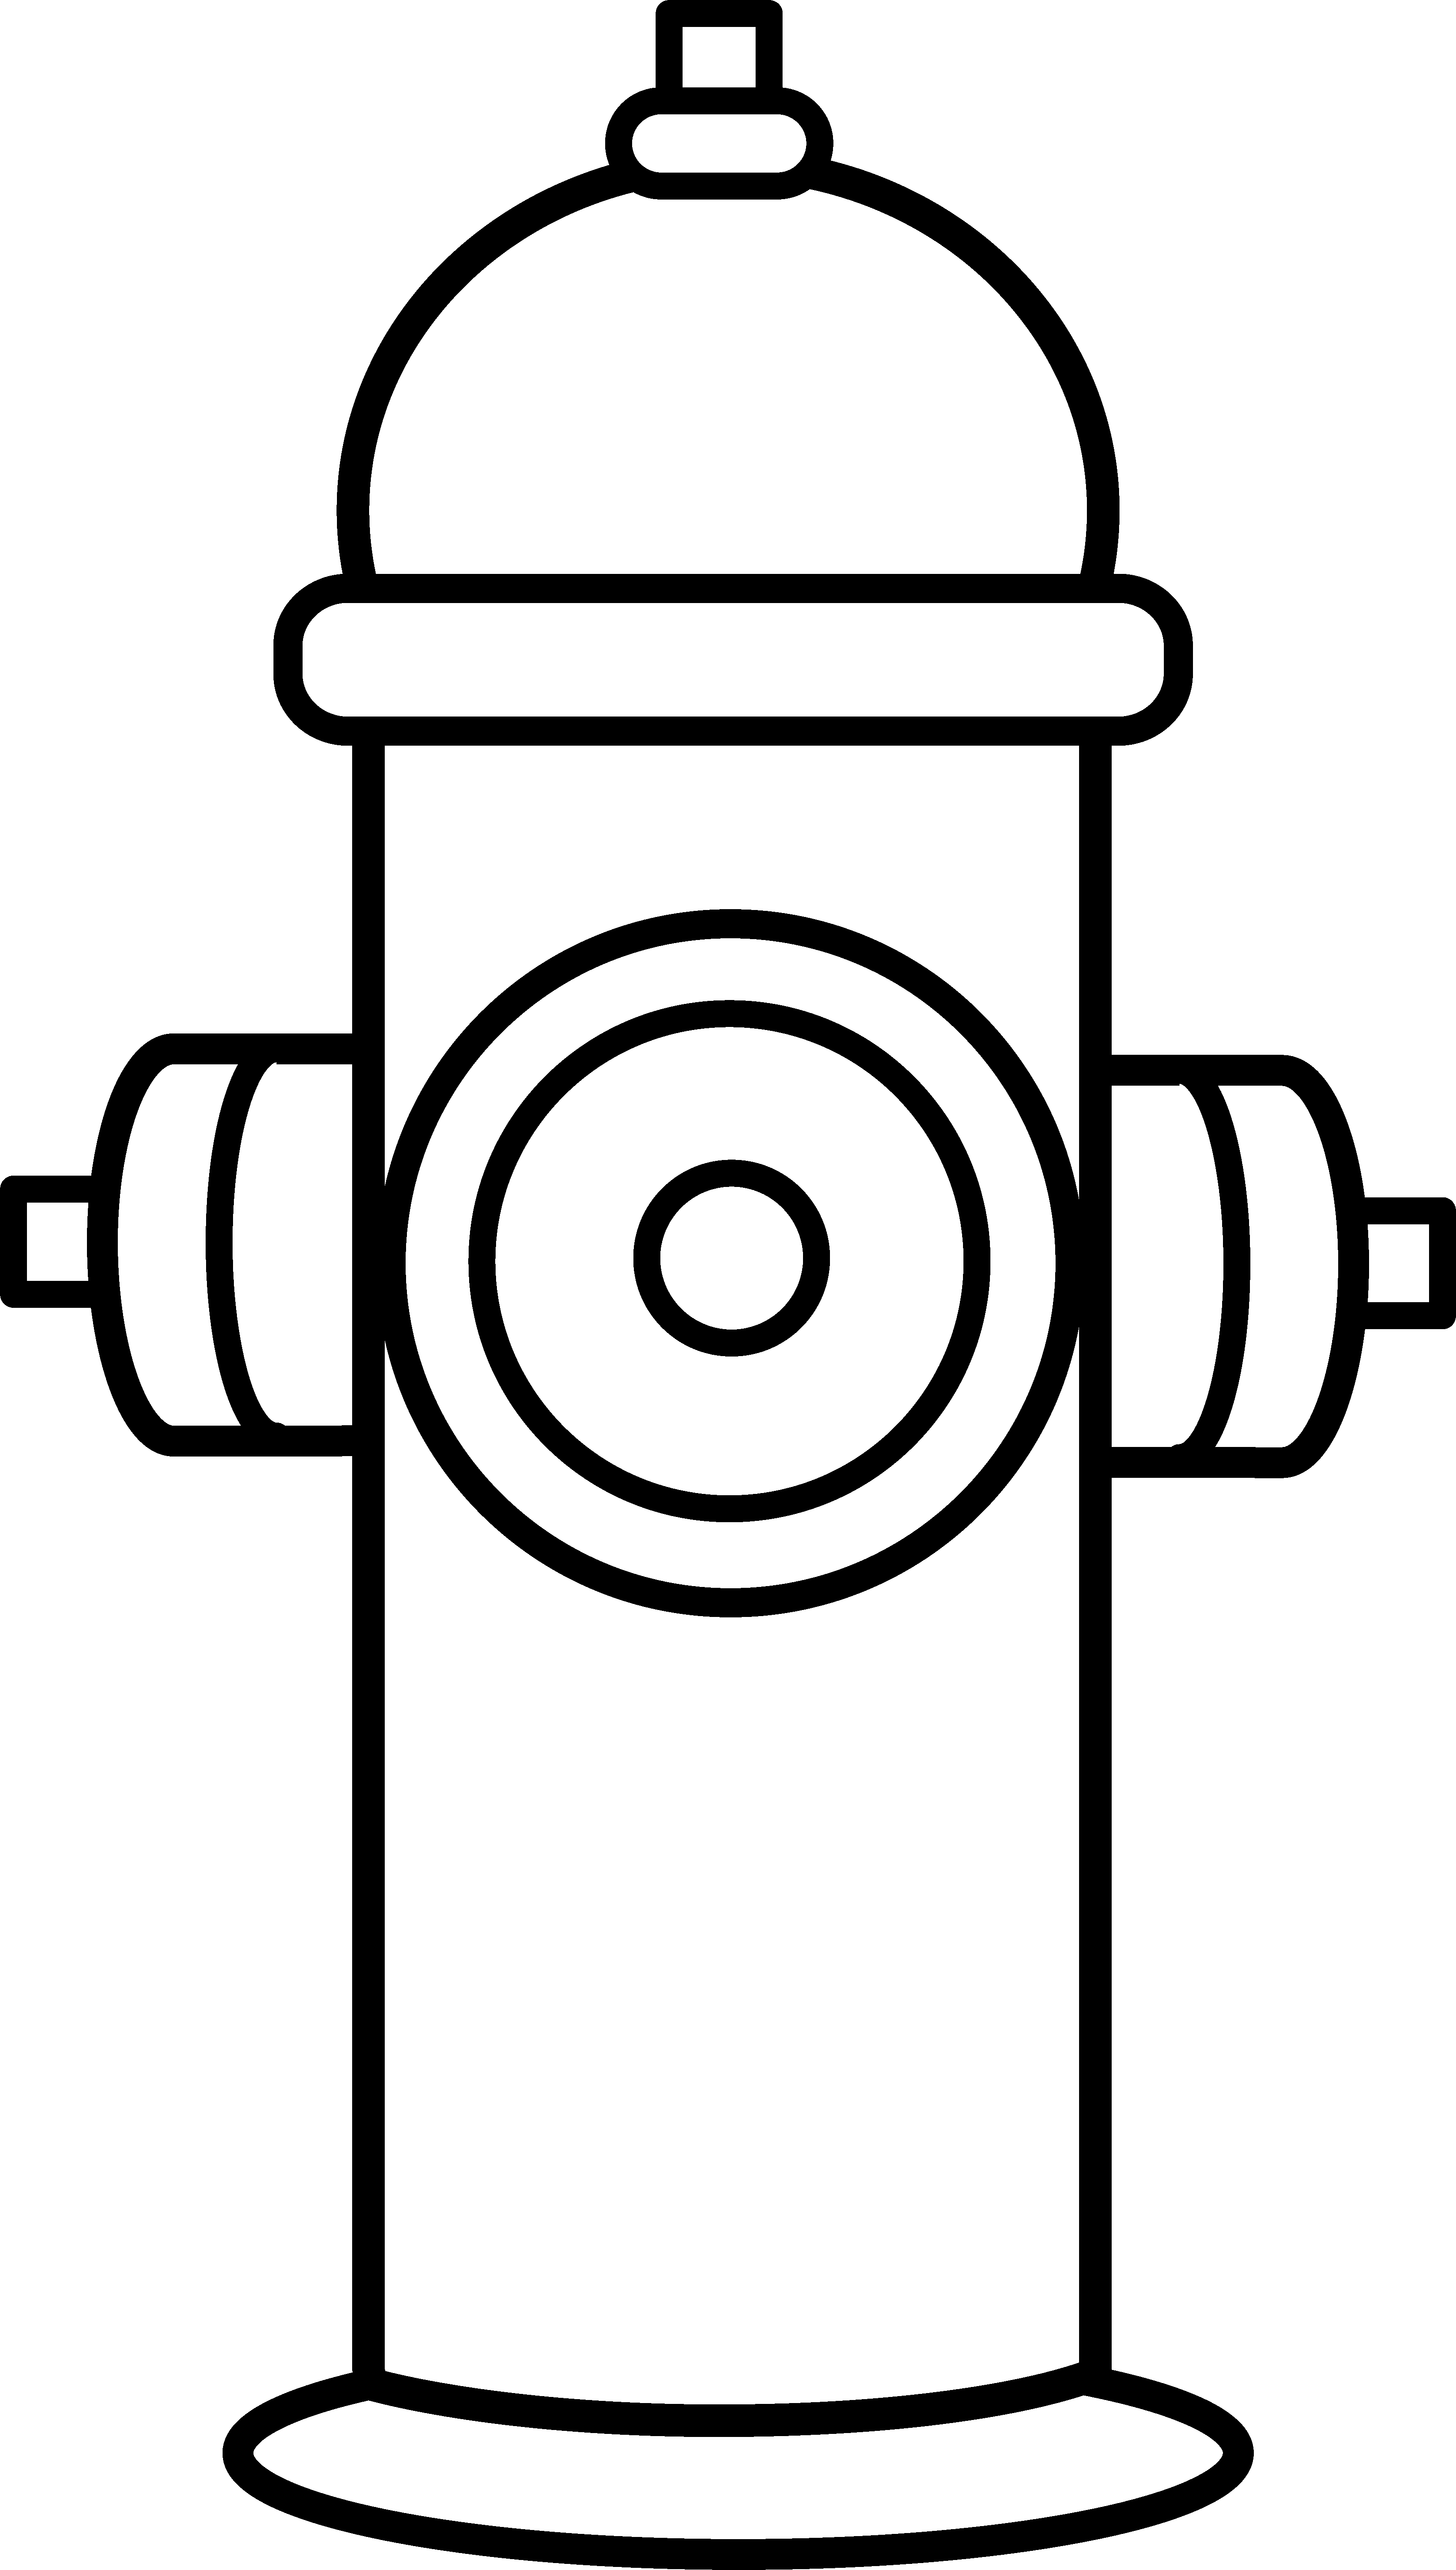 Download Fire Hydrant Black . - Fire Hydrant Clipart